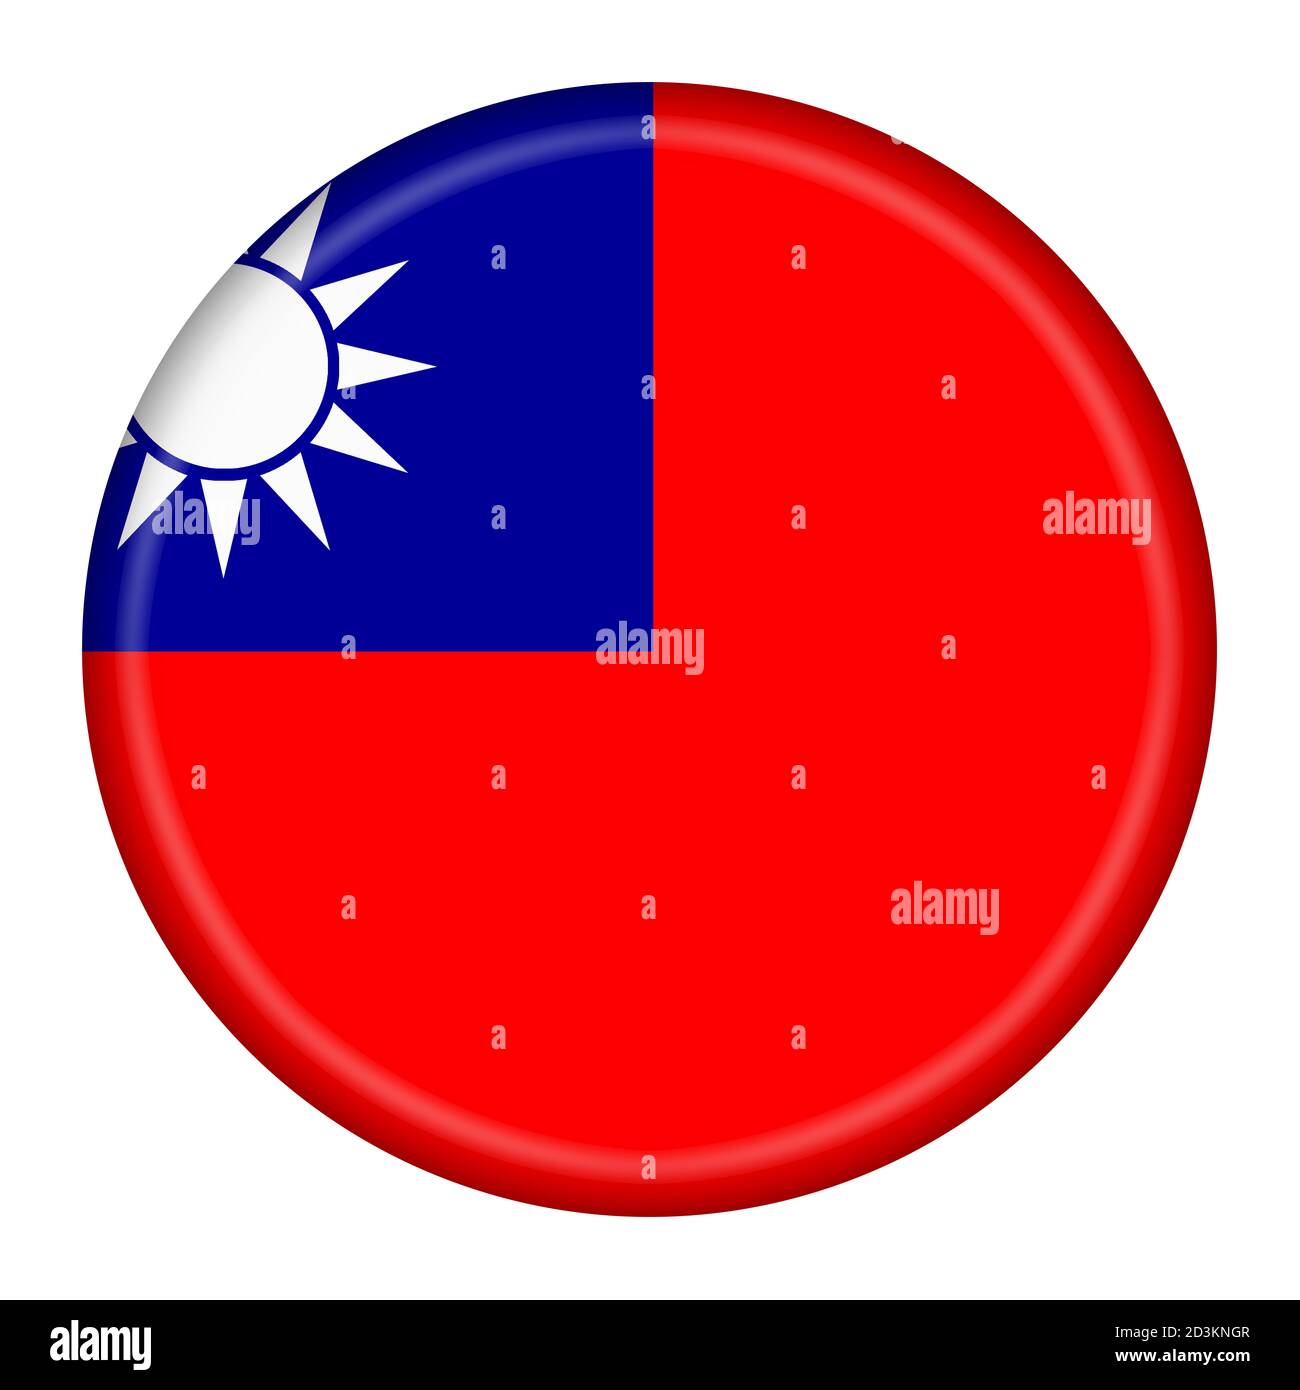 Taiwan flag button 3d illustration with clipping path Blue Sky White Sun Wholly Red Earth Stock Photo